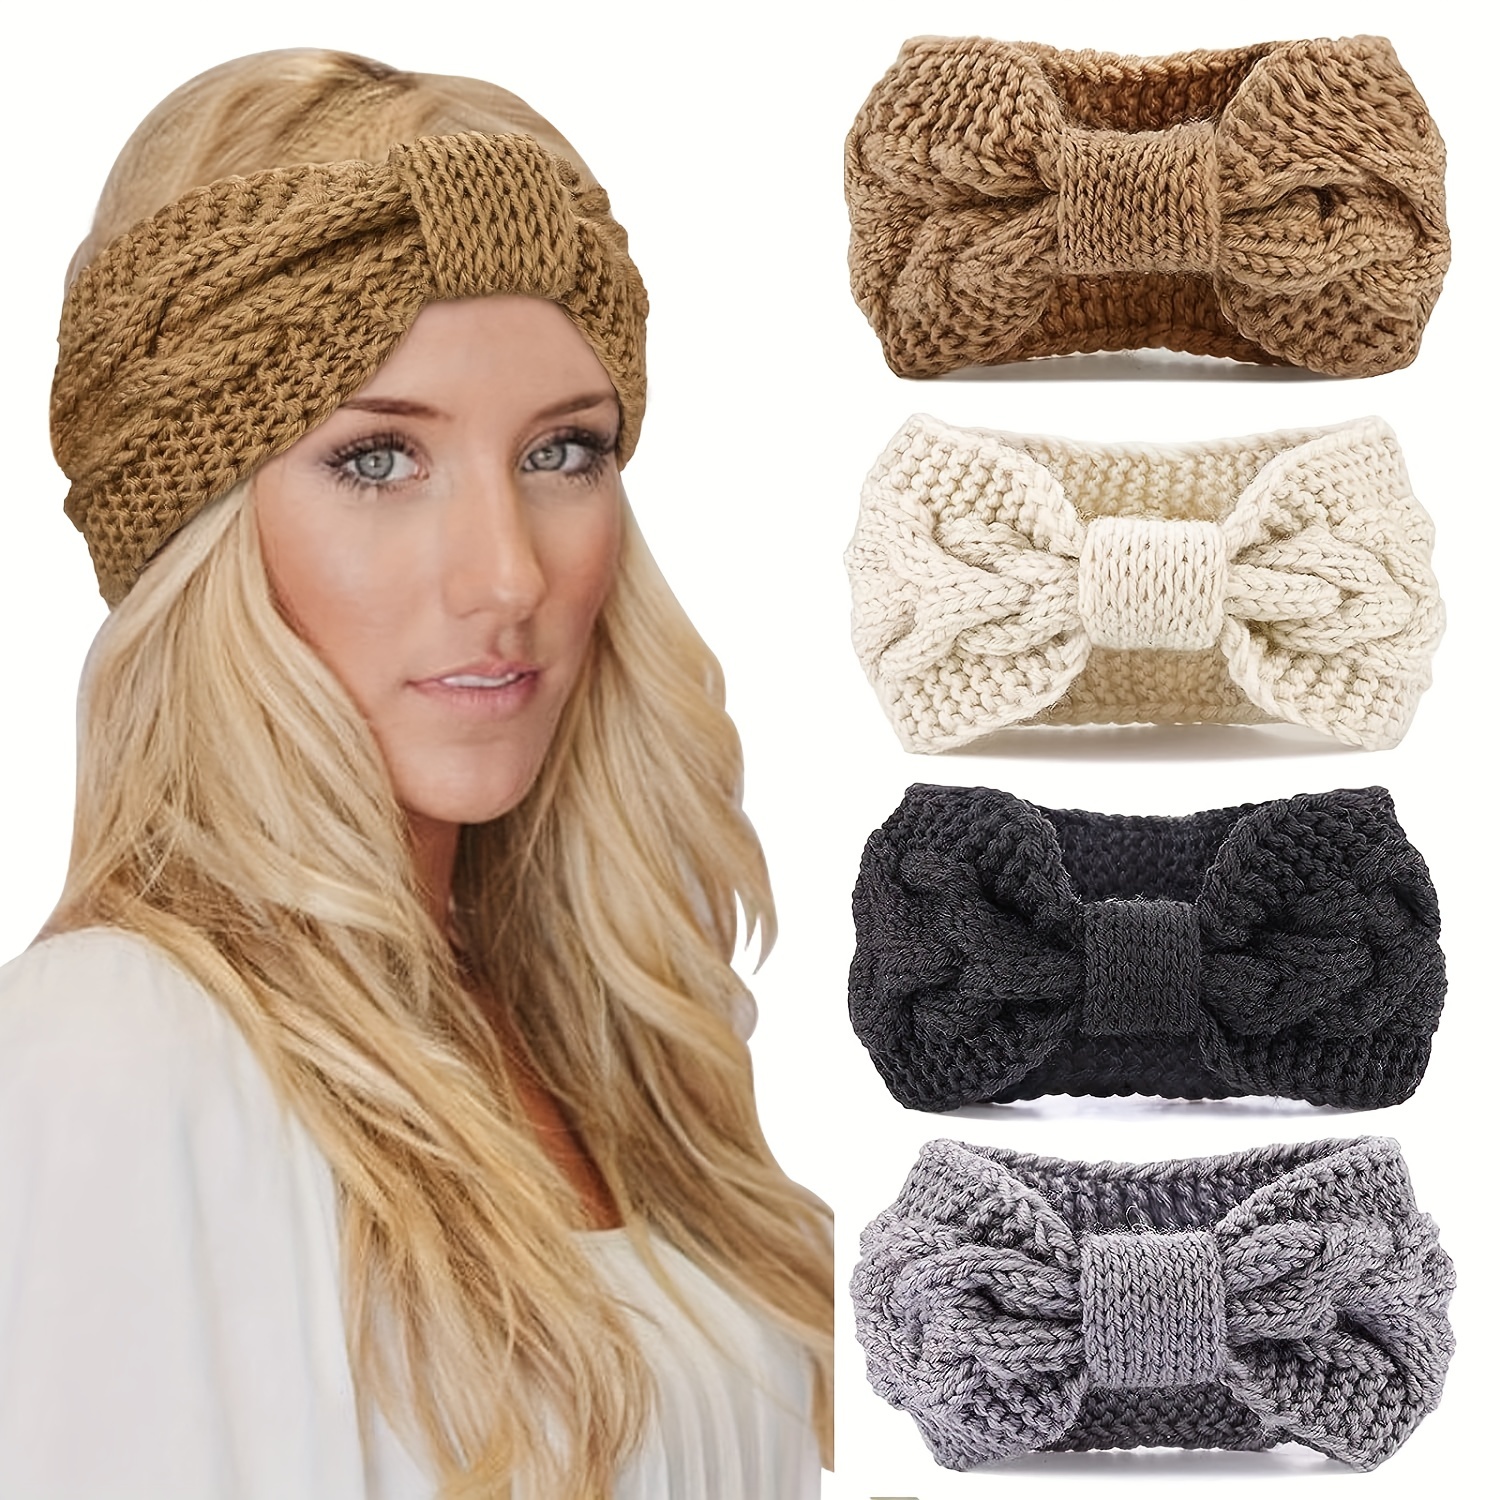 

4pcs Knitting Winter Warmer Headband Knotted Turban Hair Band Crochet Simple Solid Color Headband Hair Accessories For Women